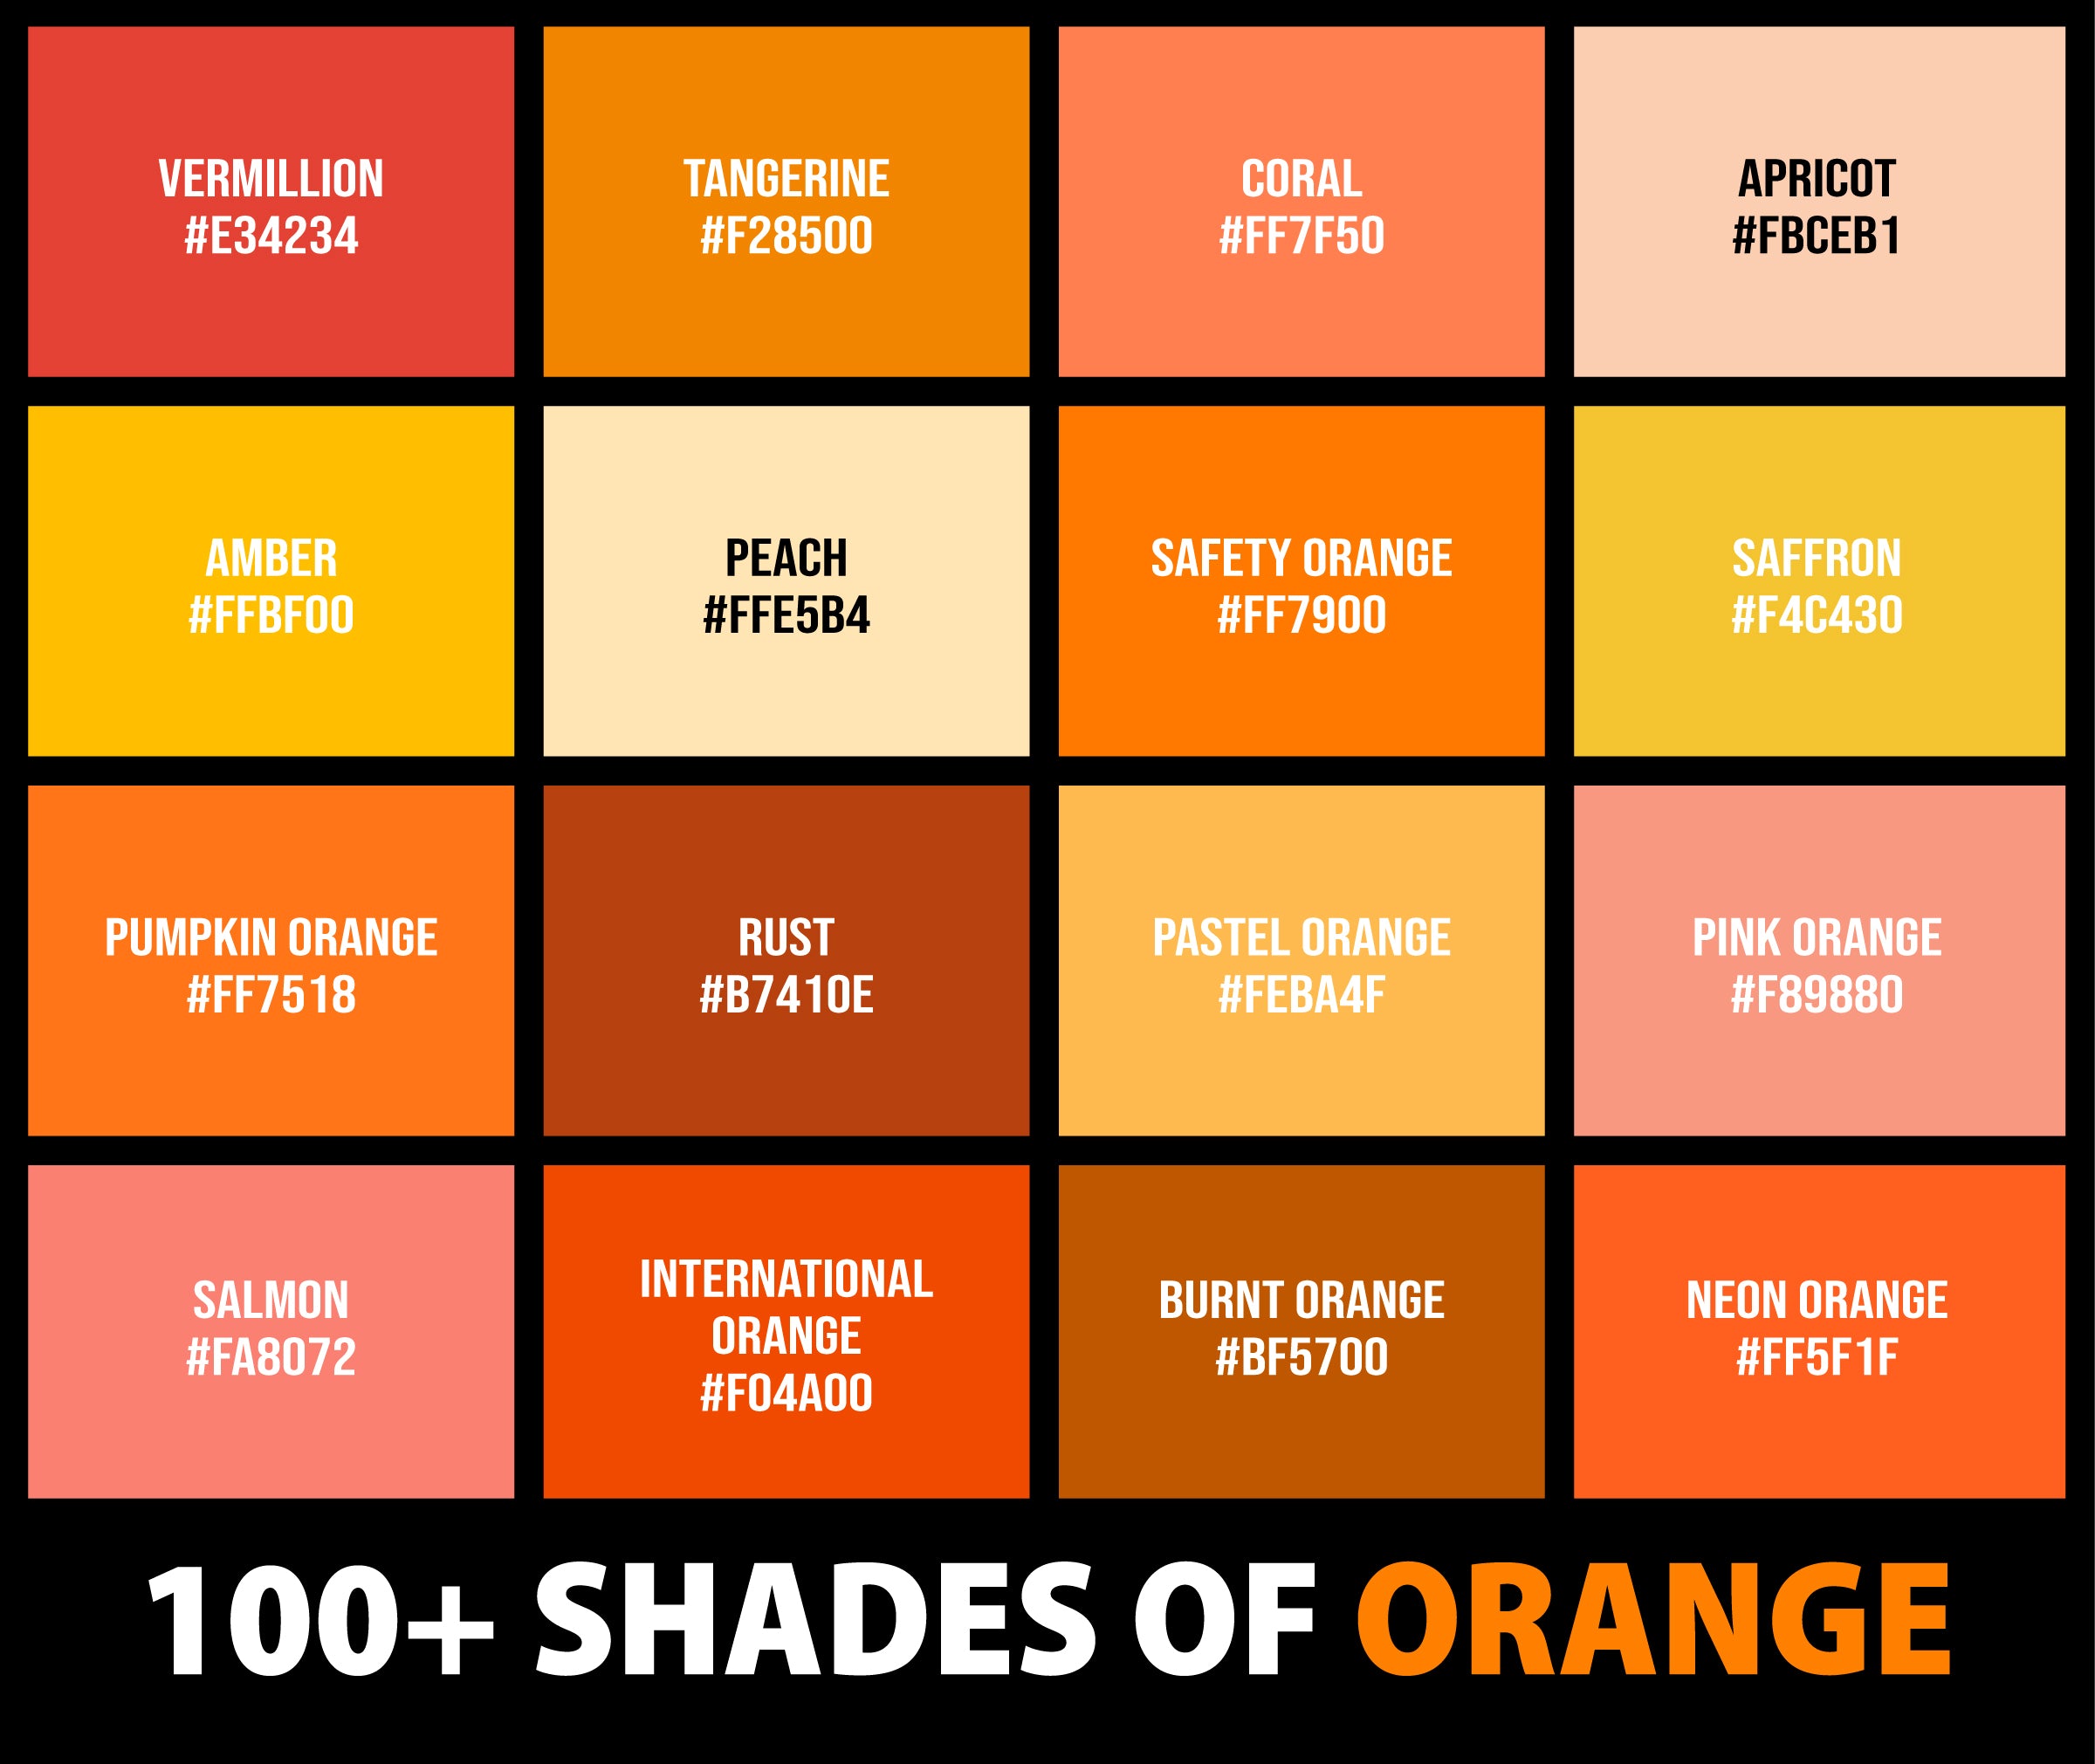 100+ Shades of Brown Color (Names, HEX, RGB & CMYK Codes) – CreativeBooster